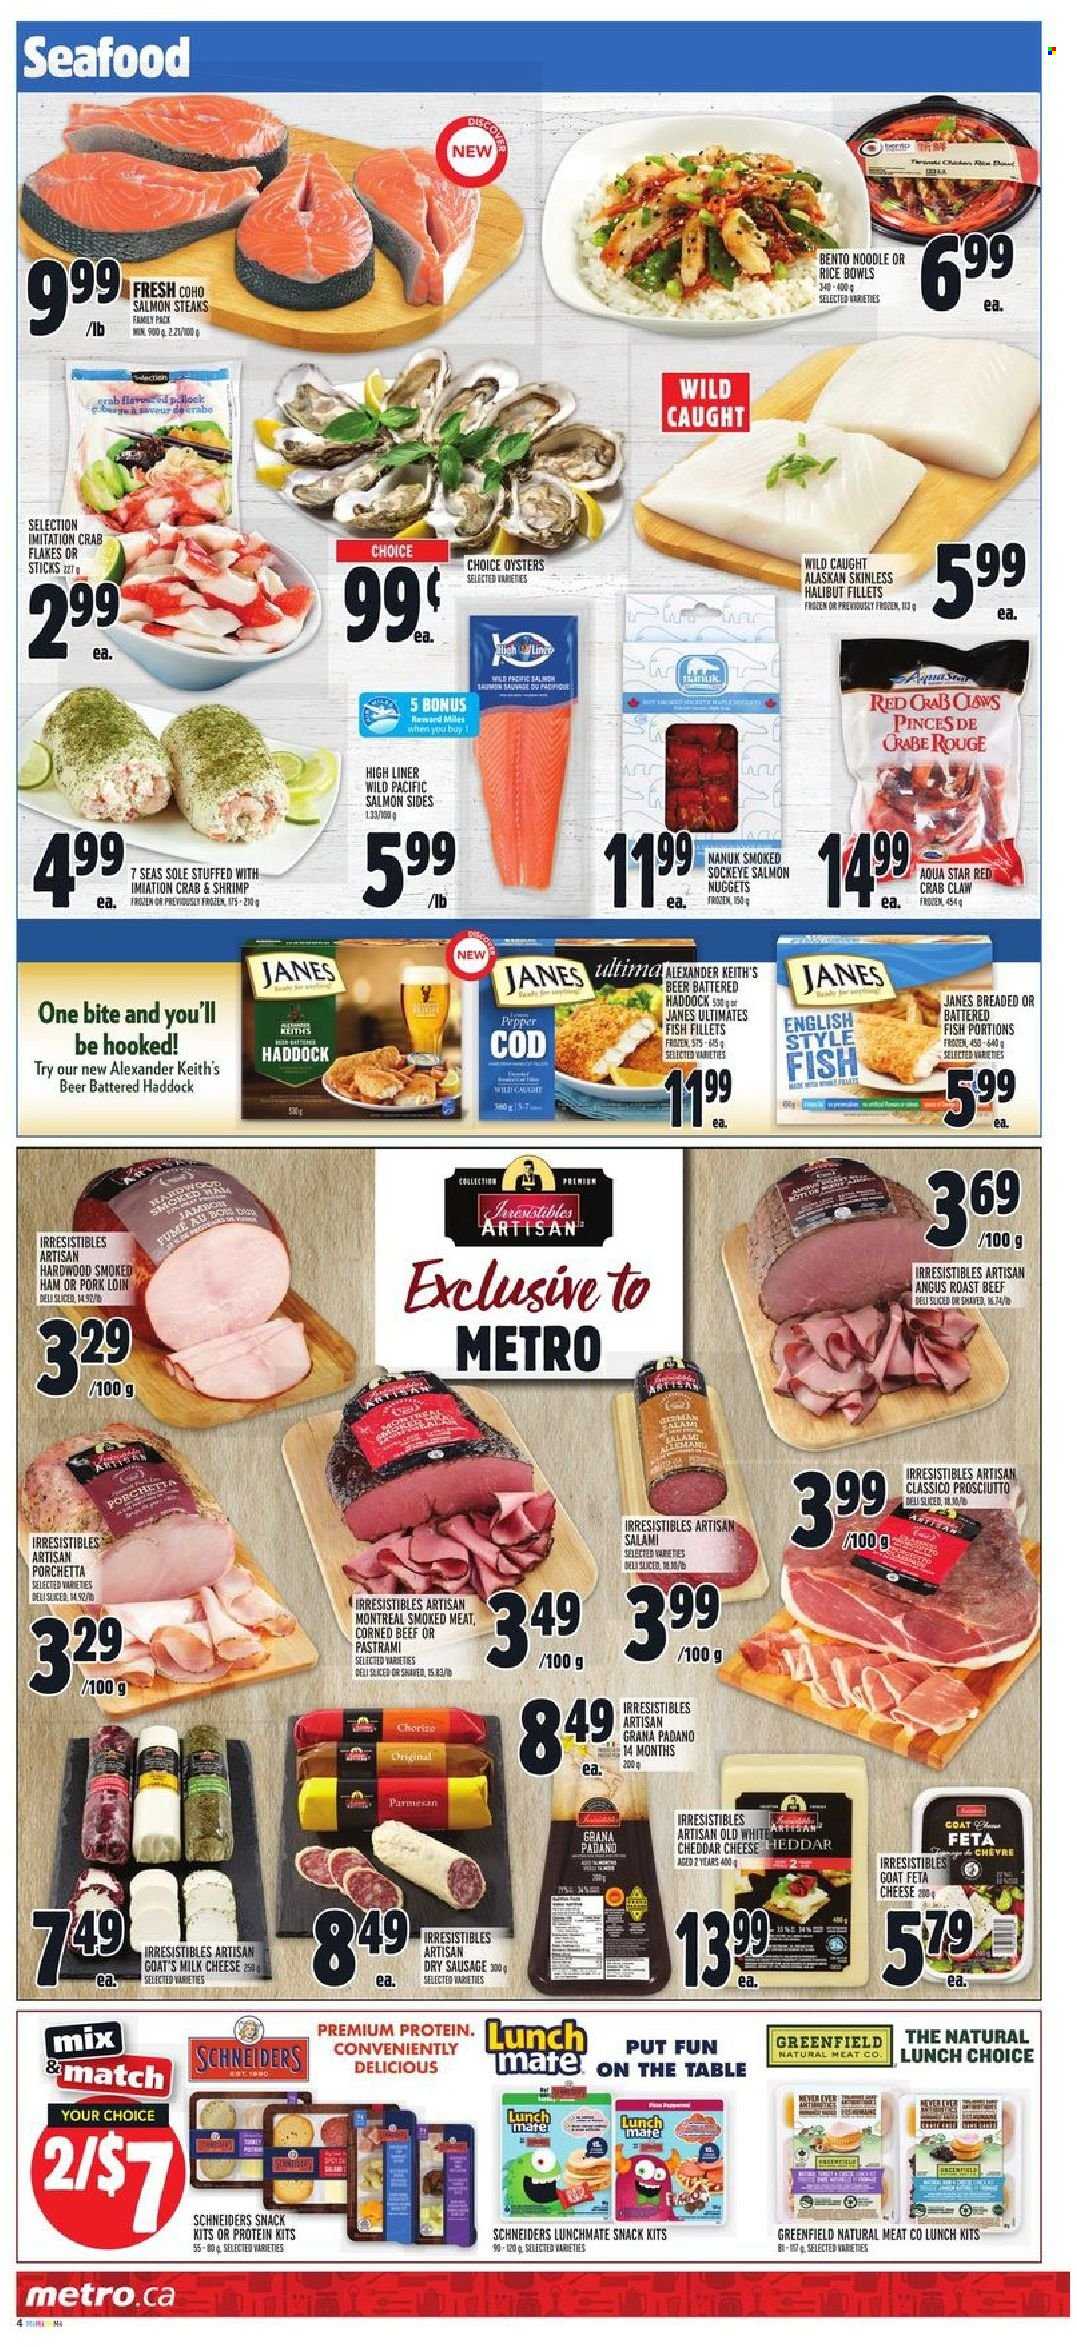 thumbnail - Metro Flyer - September 23, 2021 - September 29, 2021 - Sales products - fish fillets, salmon, haddock, halibut, oysters, seafood, crab, fish, shrimps, nuggets, noodles, salami, ham, prosciutto, pastrami, smoked ham, sausage, corned beef, cheddar, parmesan, cheese, feta, Grana Padano, milk, snack, pepper, Classico, beer, beef meat, roast beef, pork loin, pork meat, steak. Page 4.